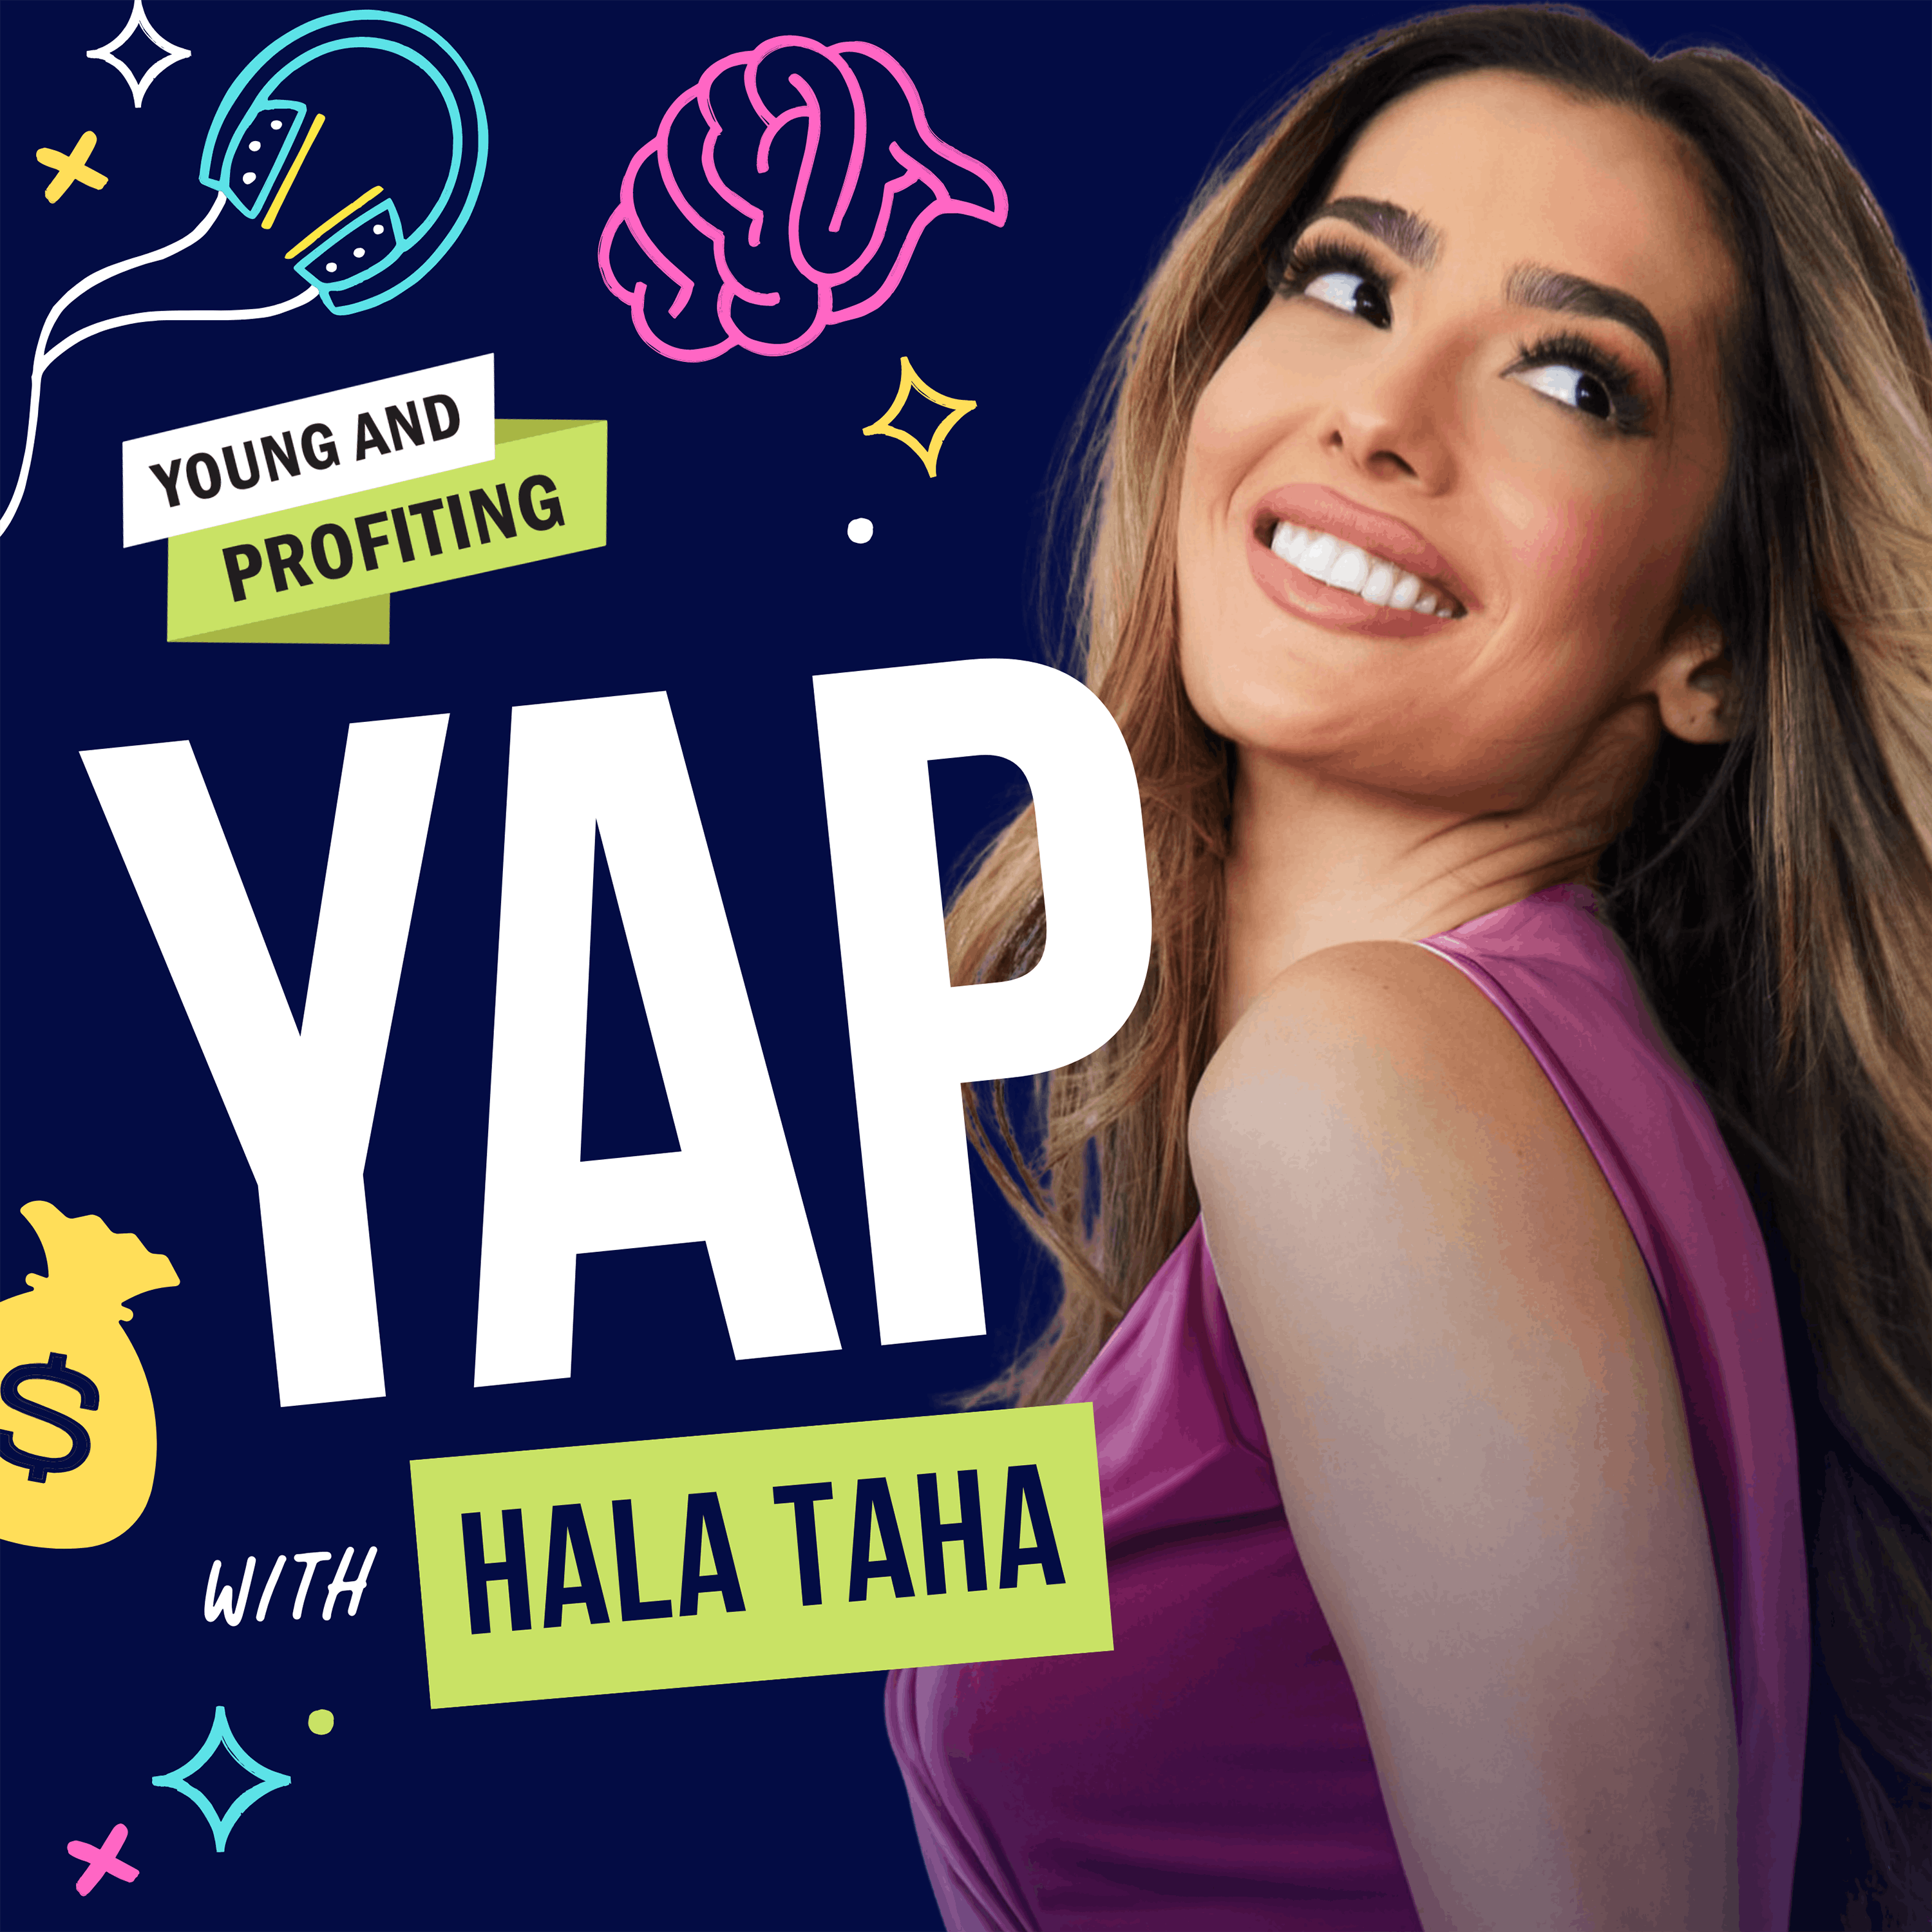 Young and Profiting with Hala Taha